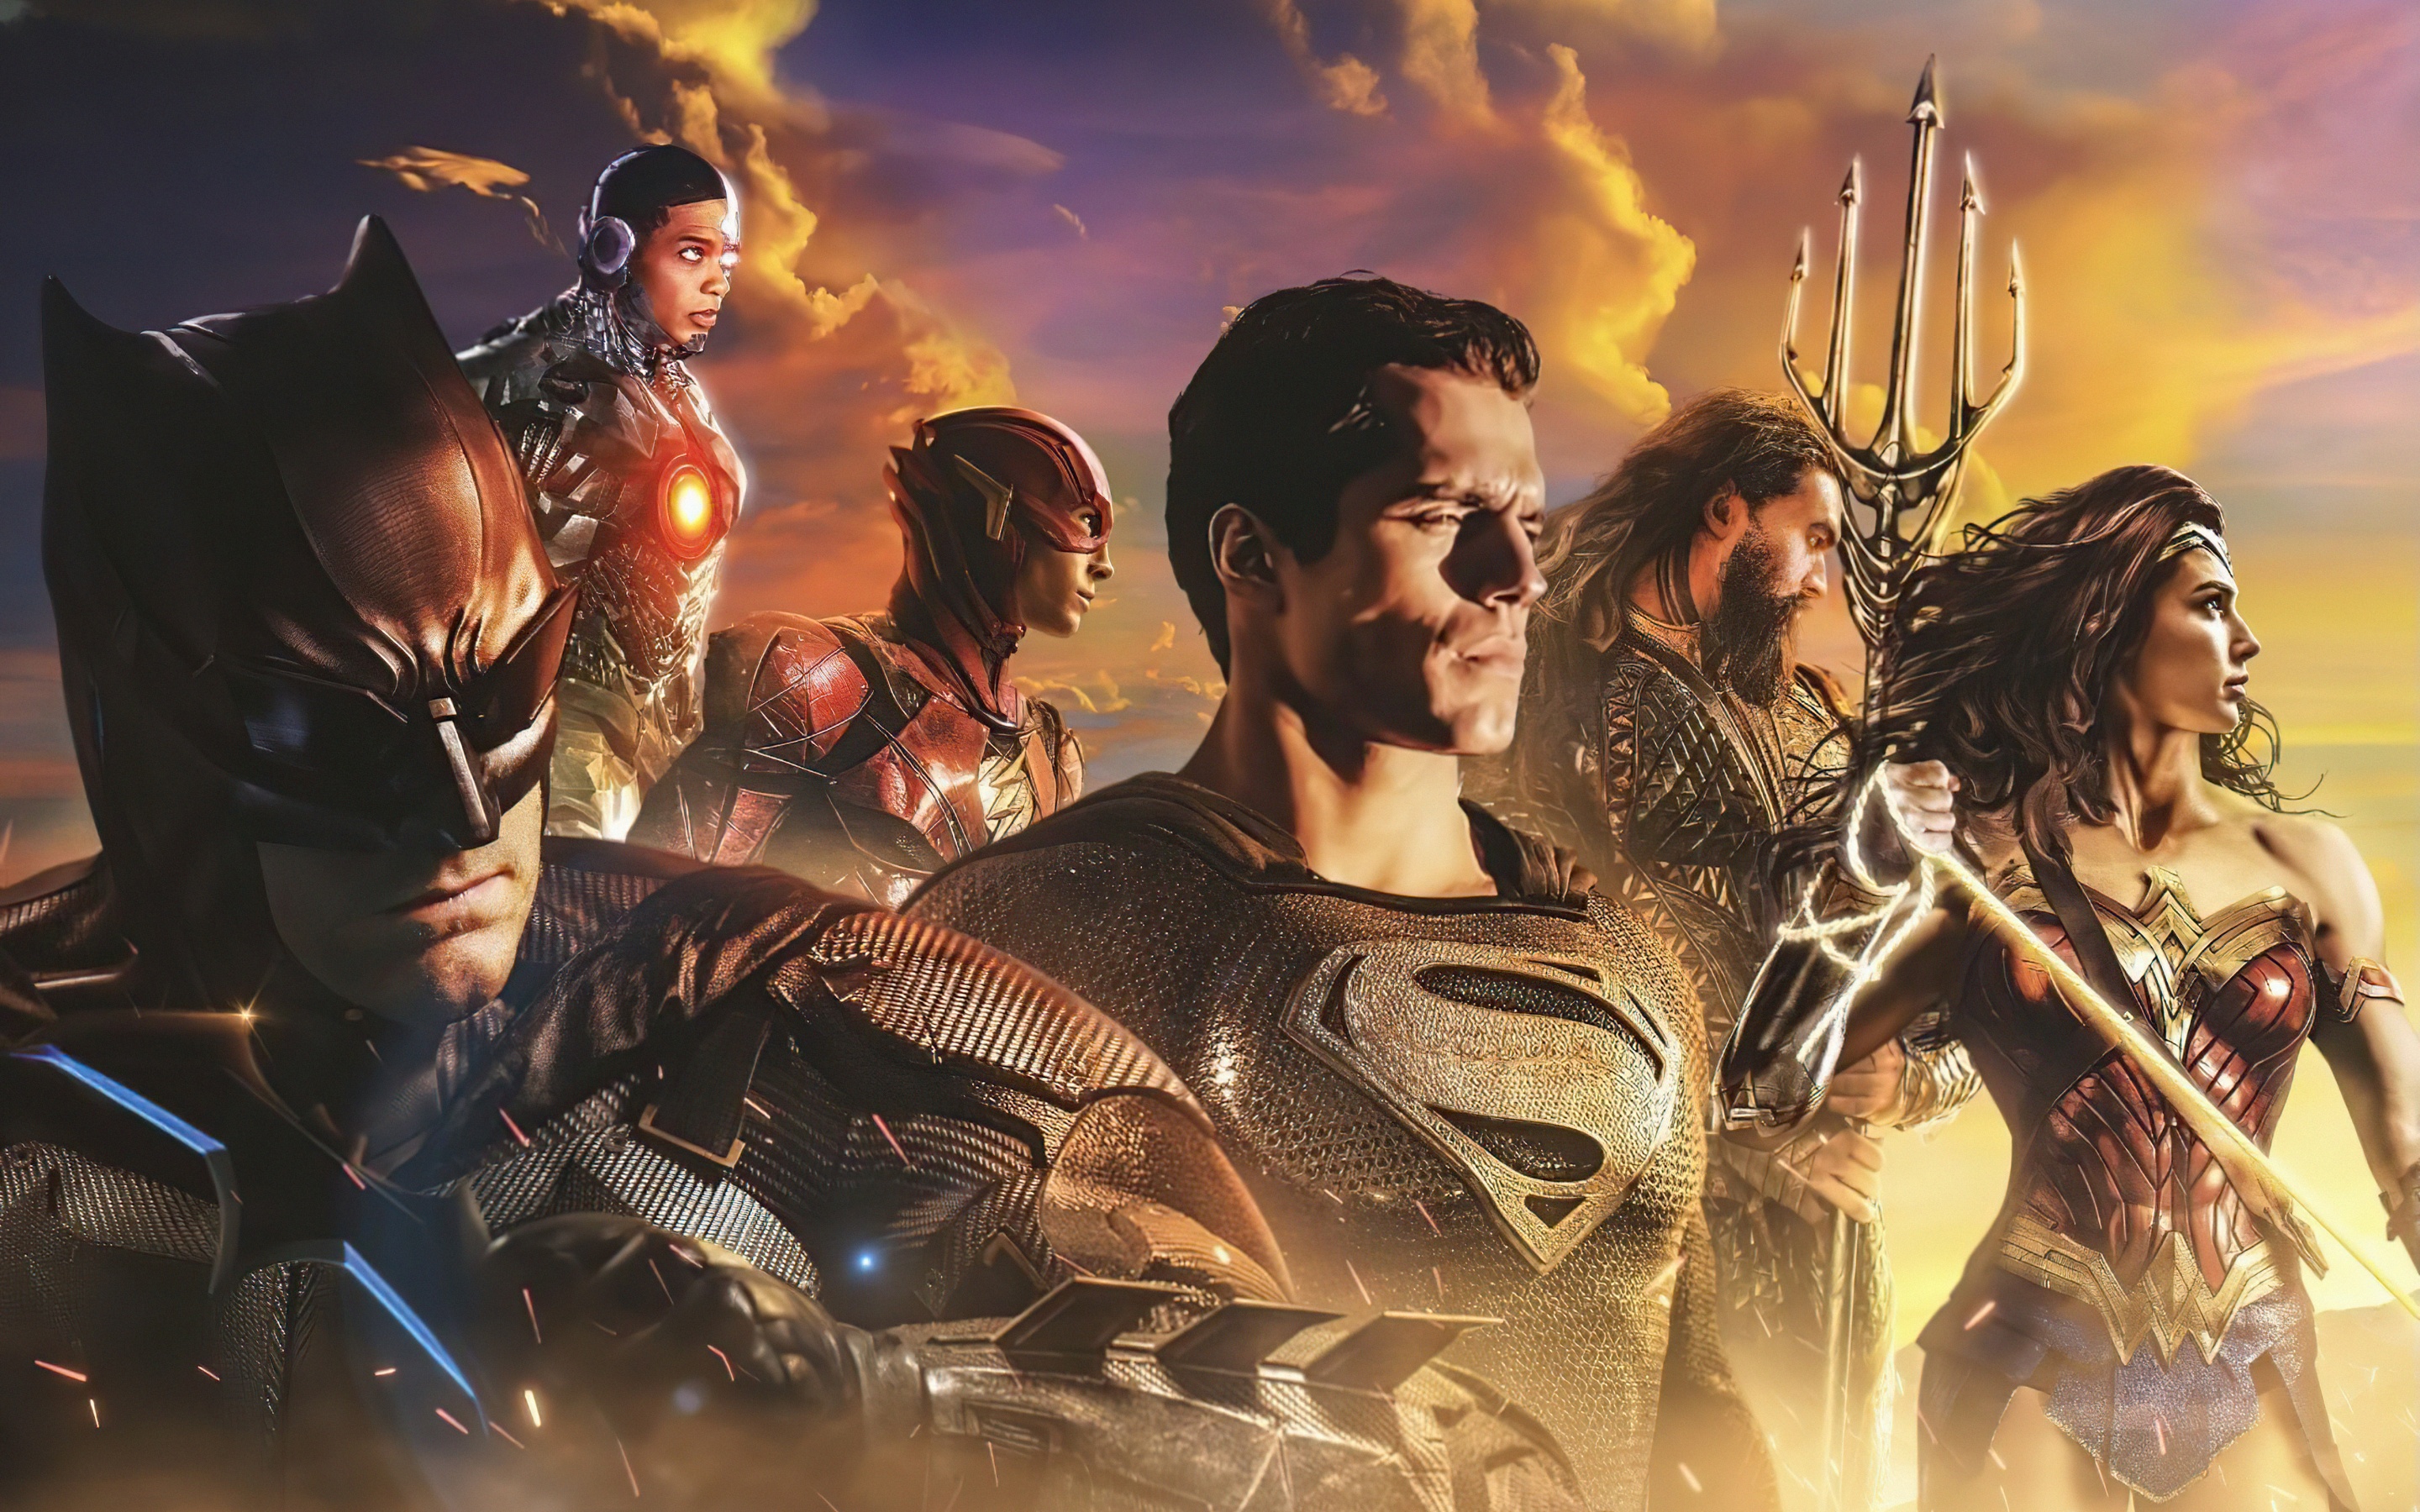 Zack Snyder's Justice League Wallpaper 4K, DC Superheroes, Movies, #4980